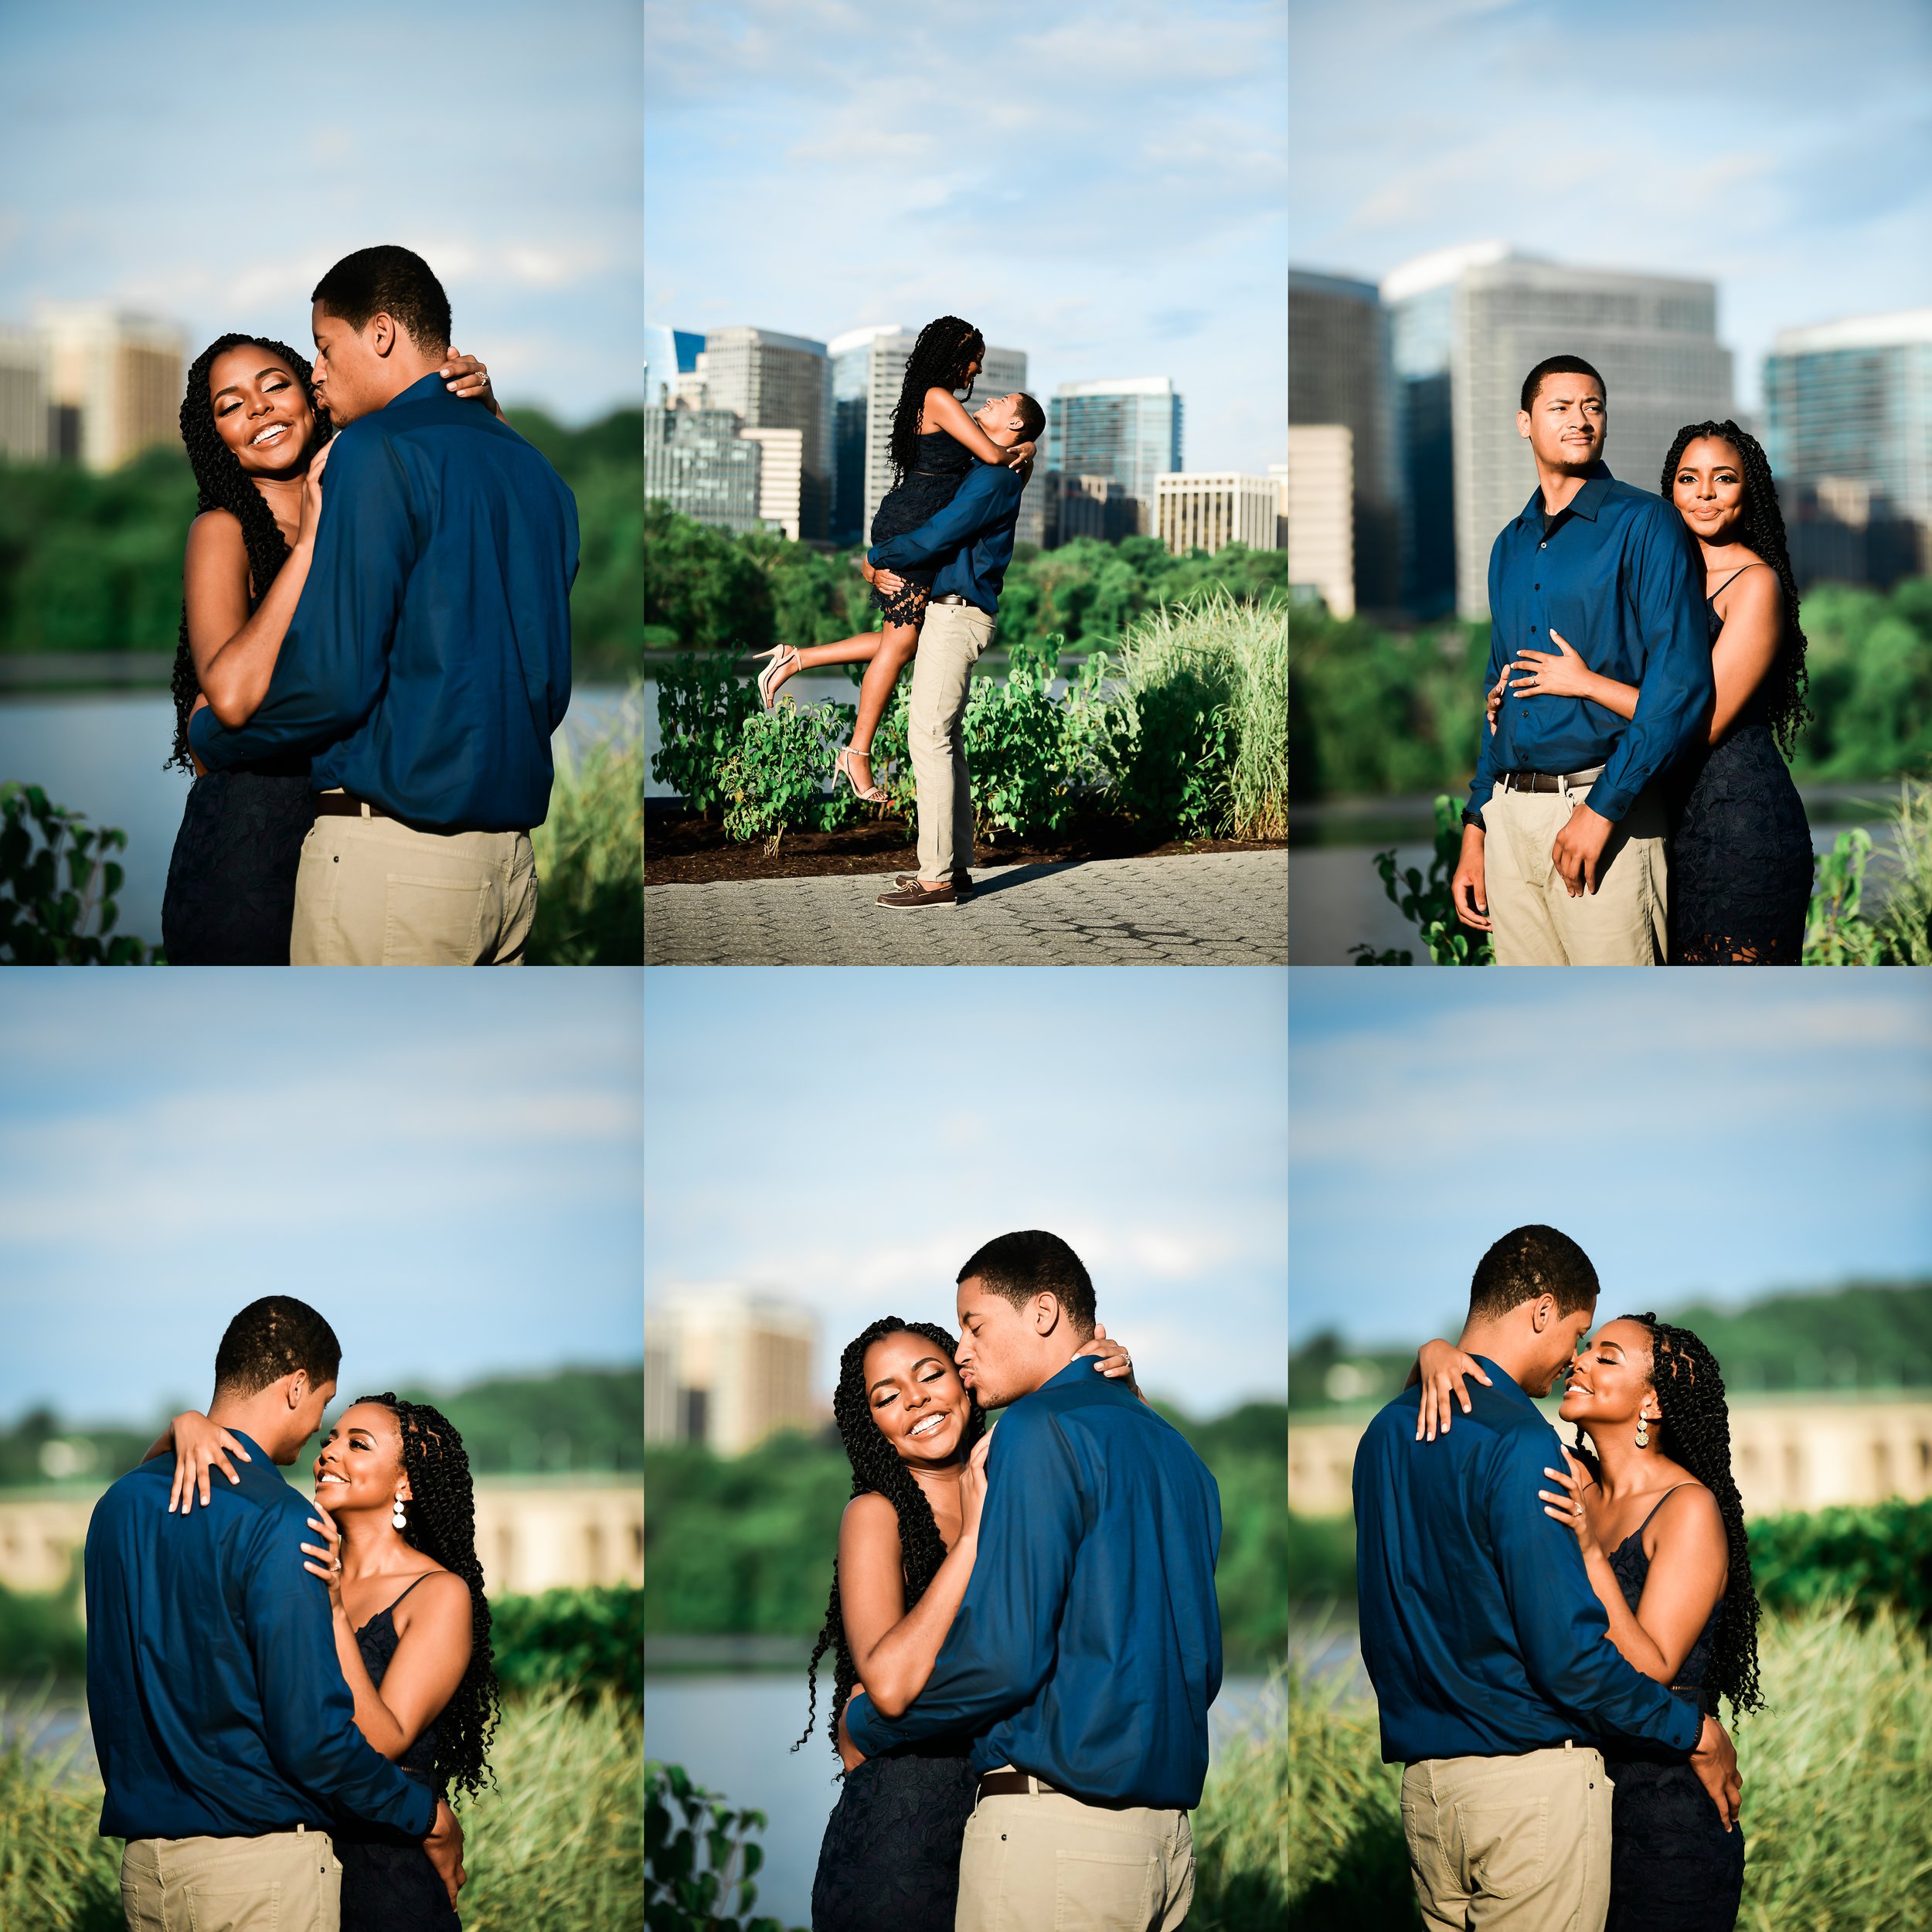 Engagement session at the Georgetown Waterfront in Washington DC